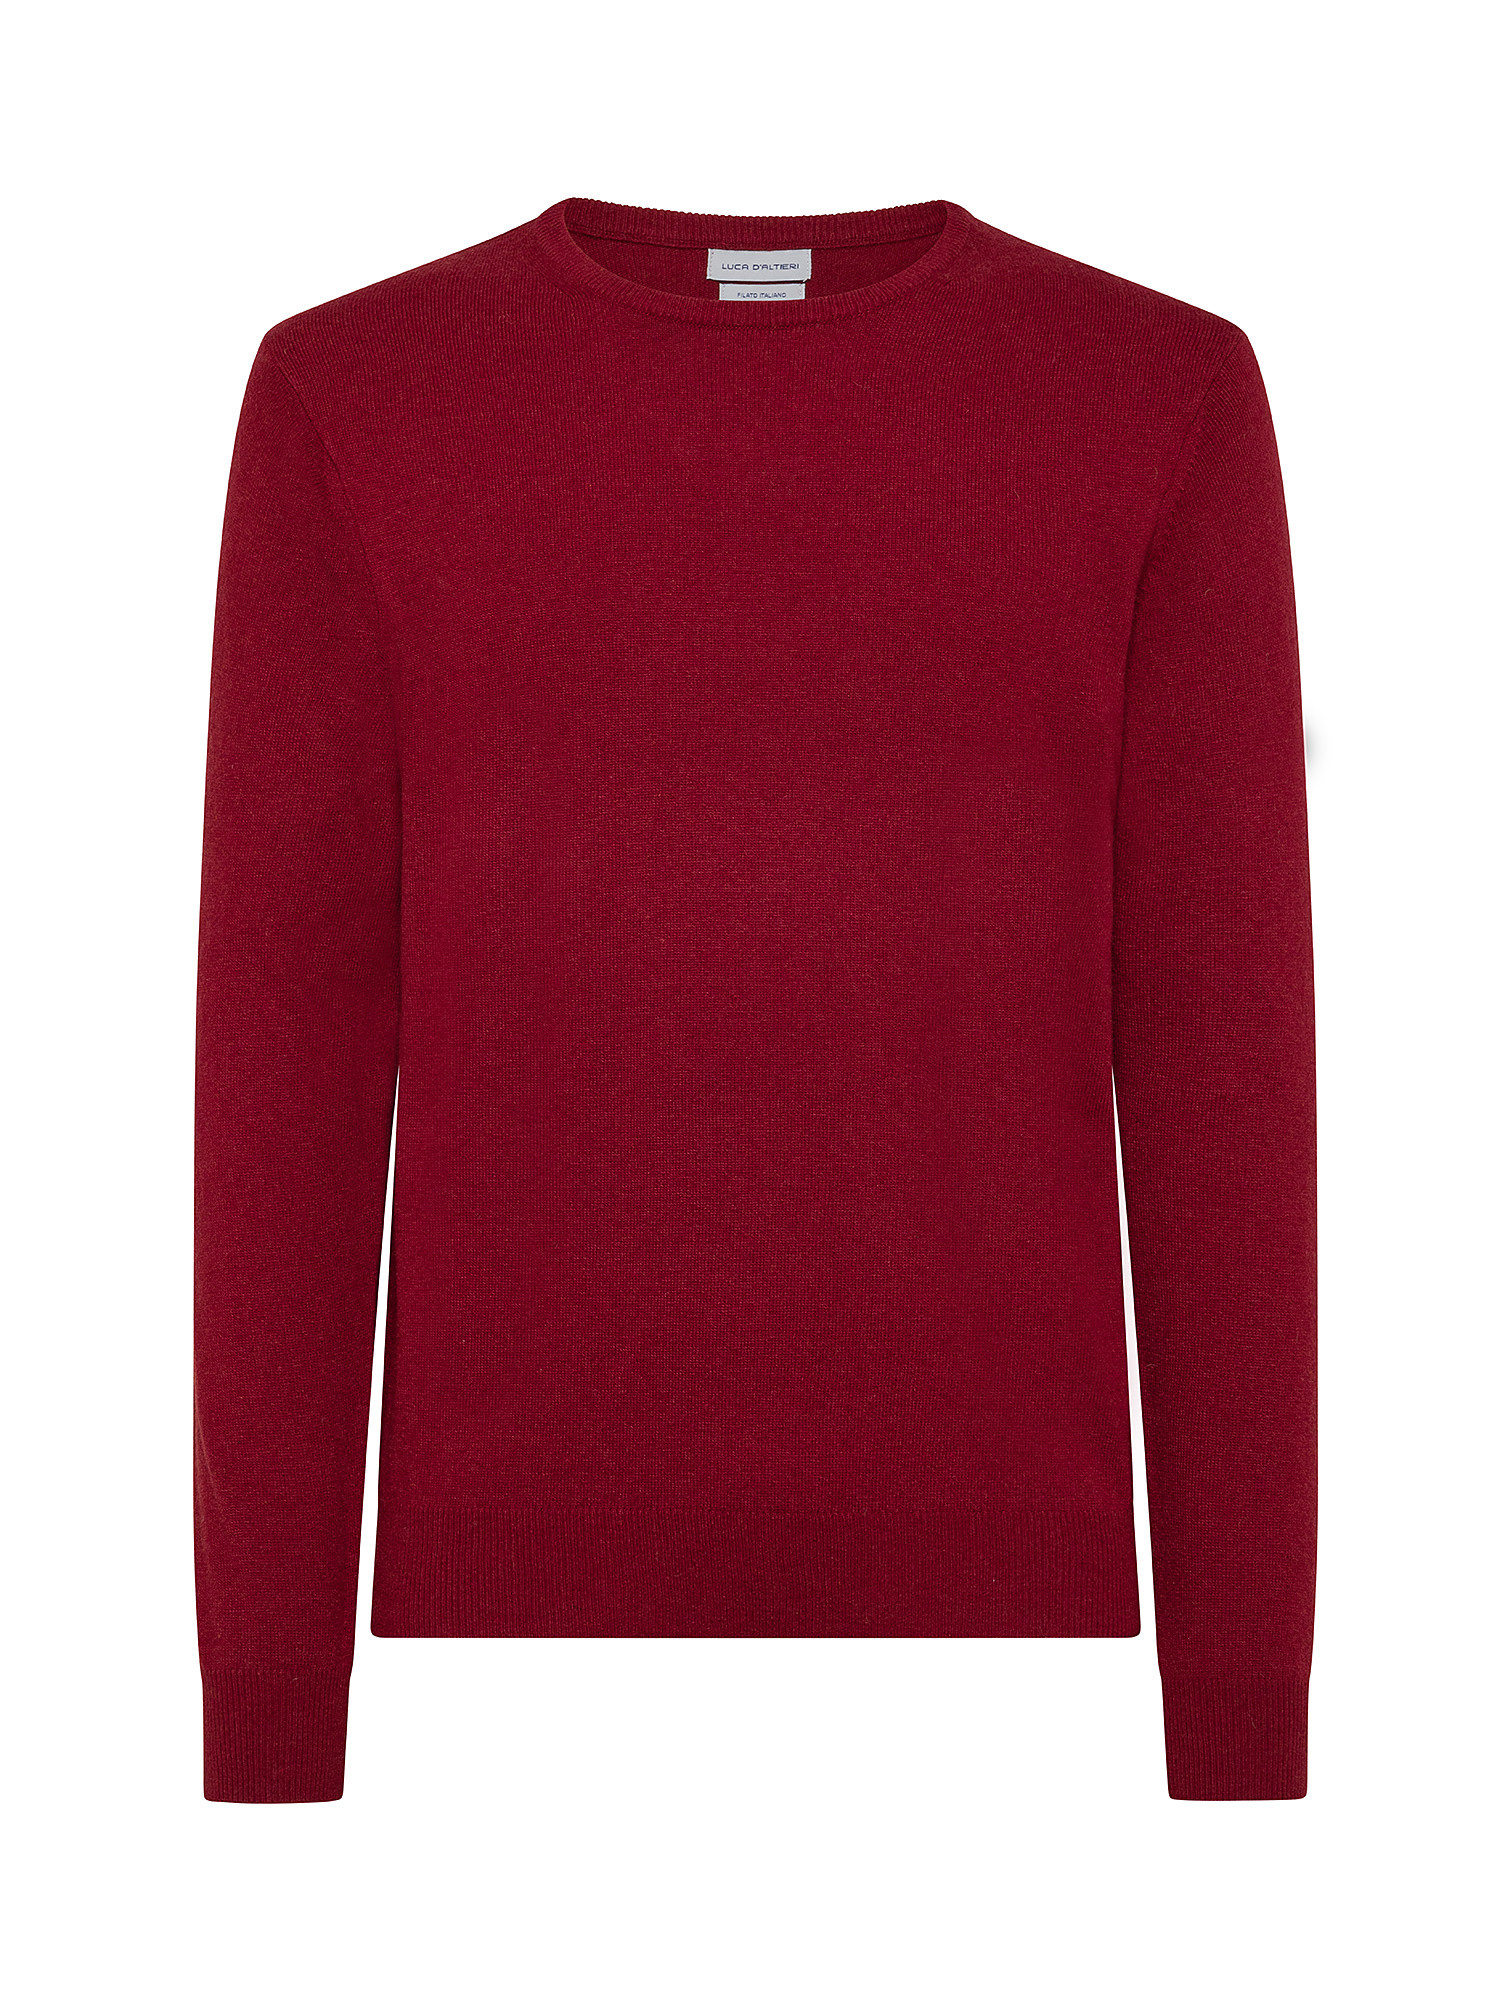 Cashmere Blend crewneck sweater with noble fibers, Red Bordeaux, large image number 0